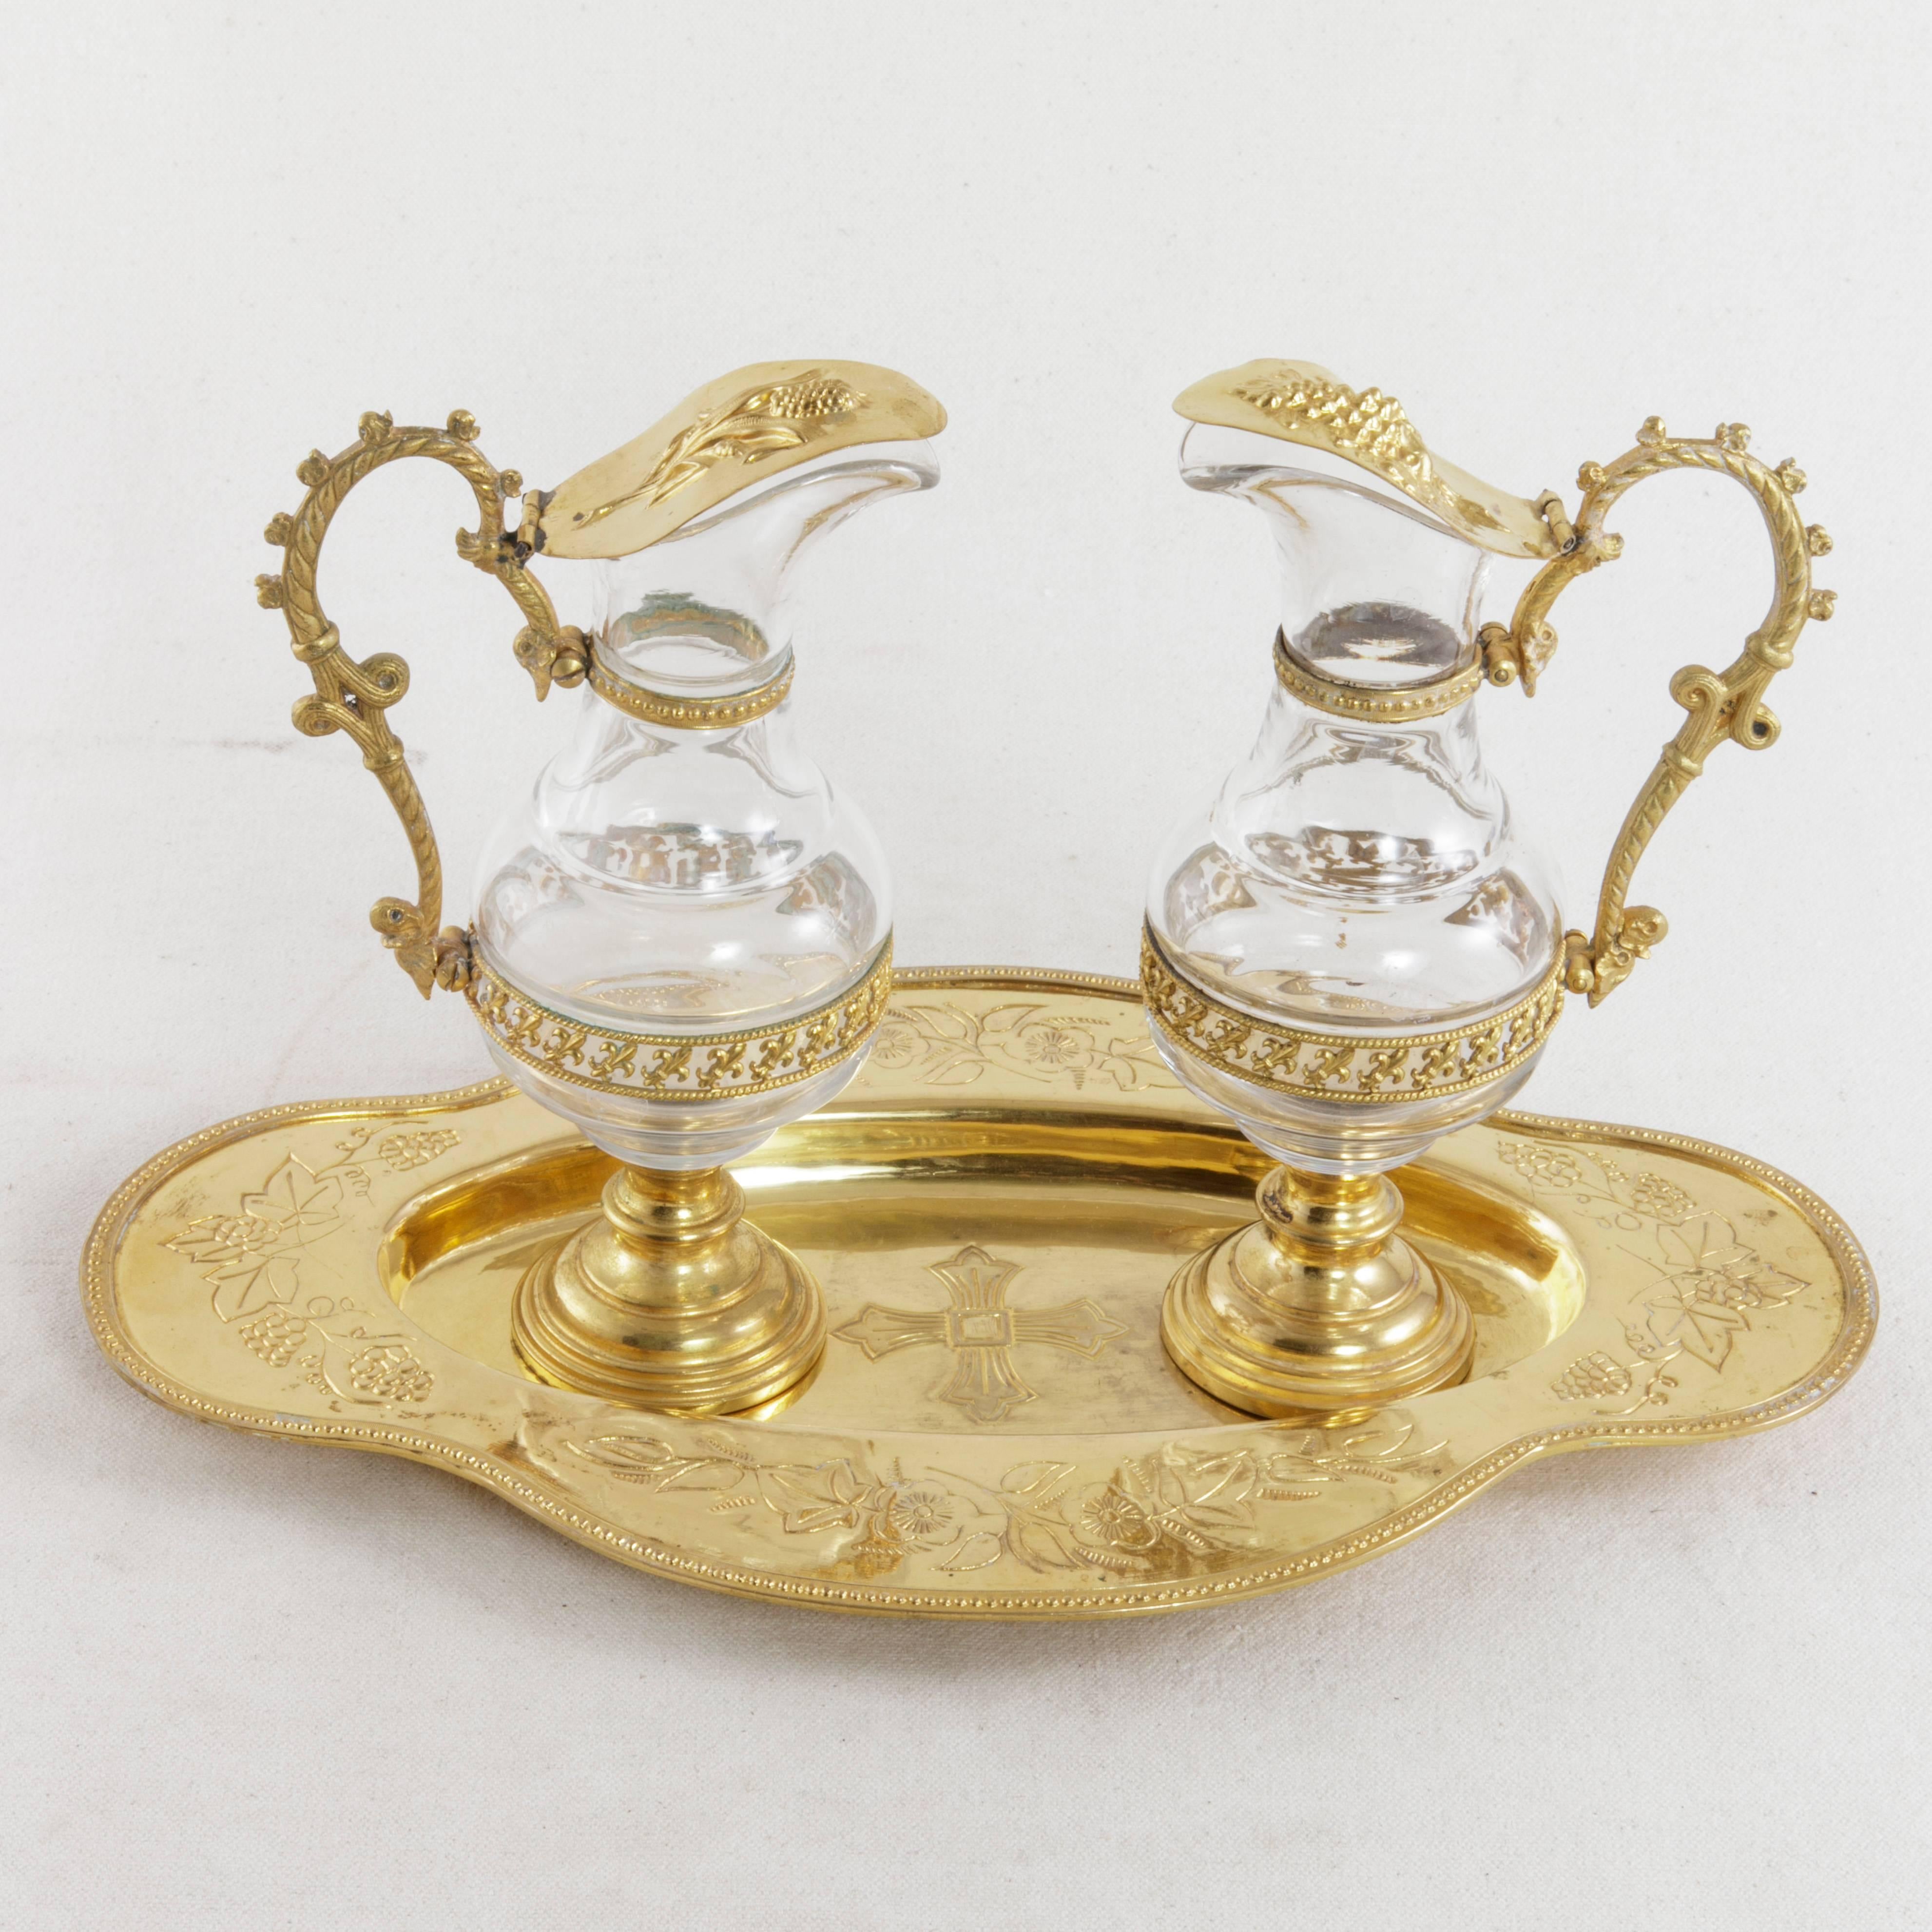 Originally used on the altar by a priest for consecrating wine for Holy Communion, this set of glass cruets from the early 20th century features gilded metal lids detailed with wheat on one and grapes on the other. A ring of fleur-de-lys on the